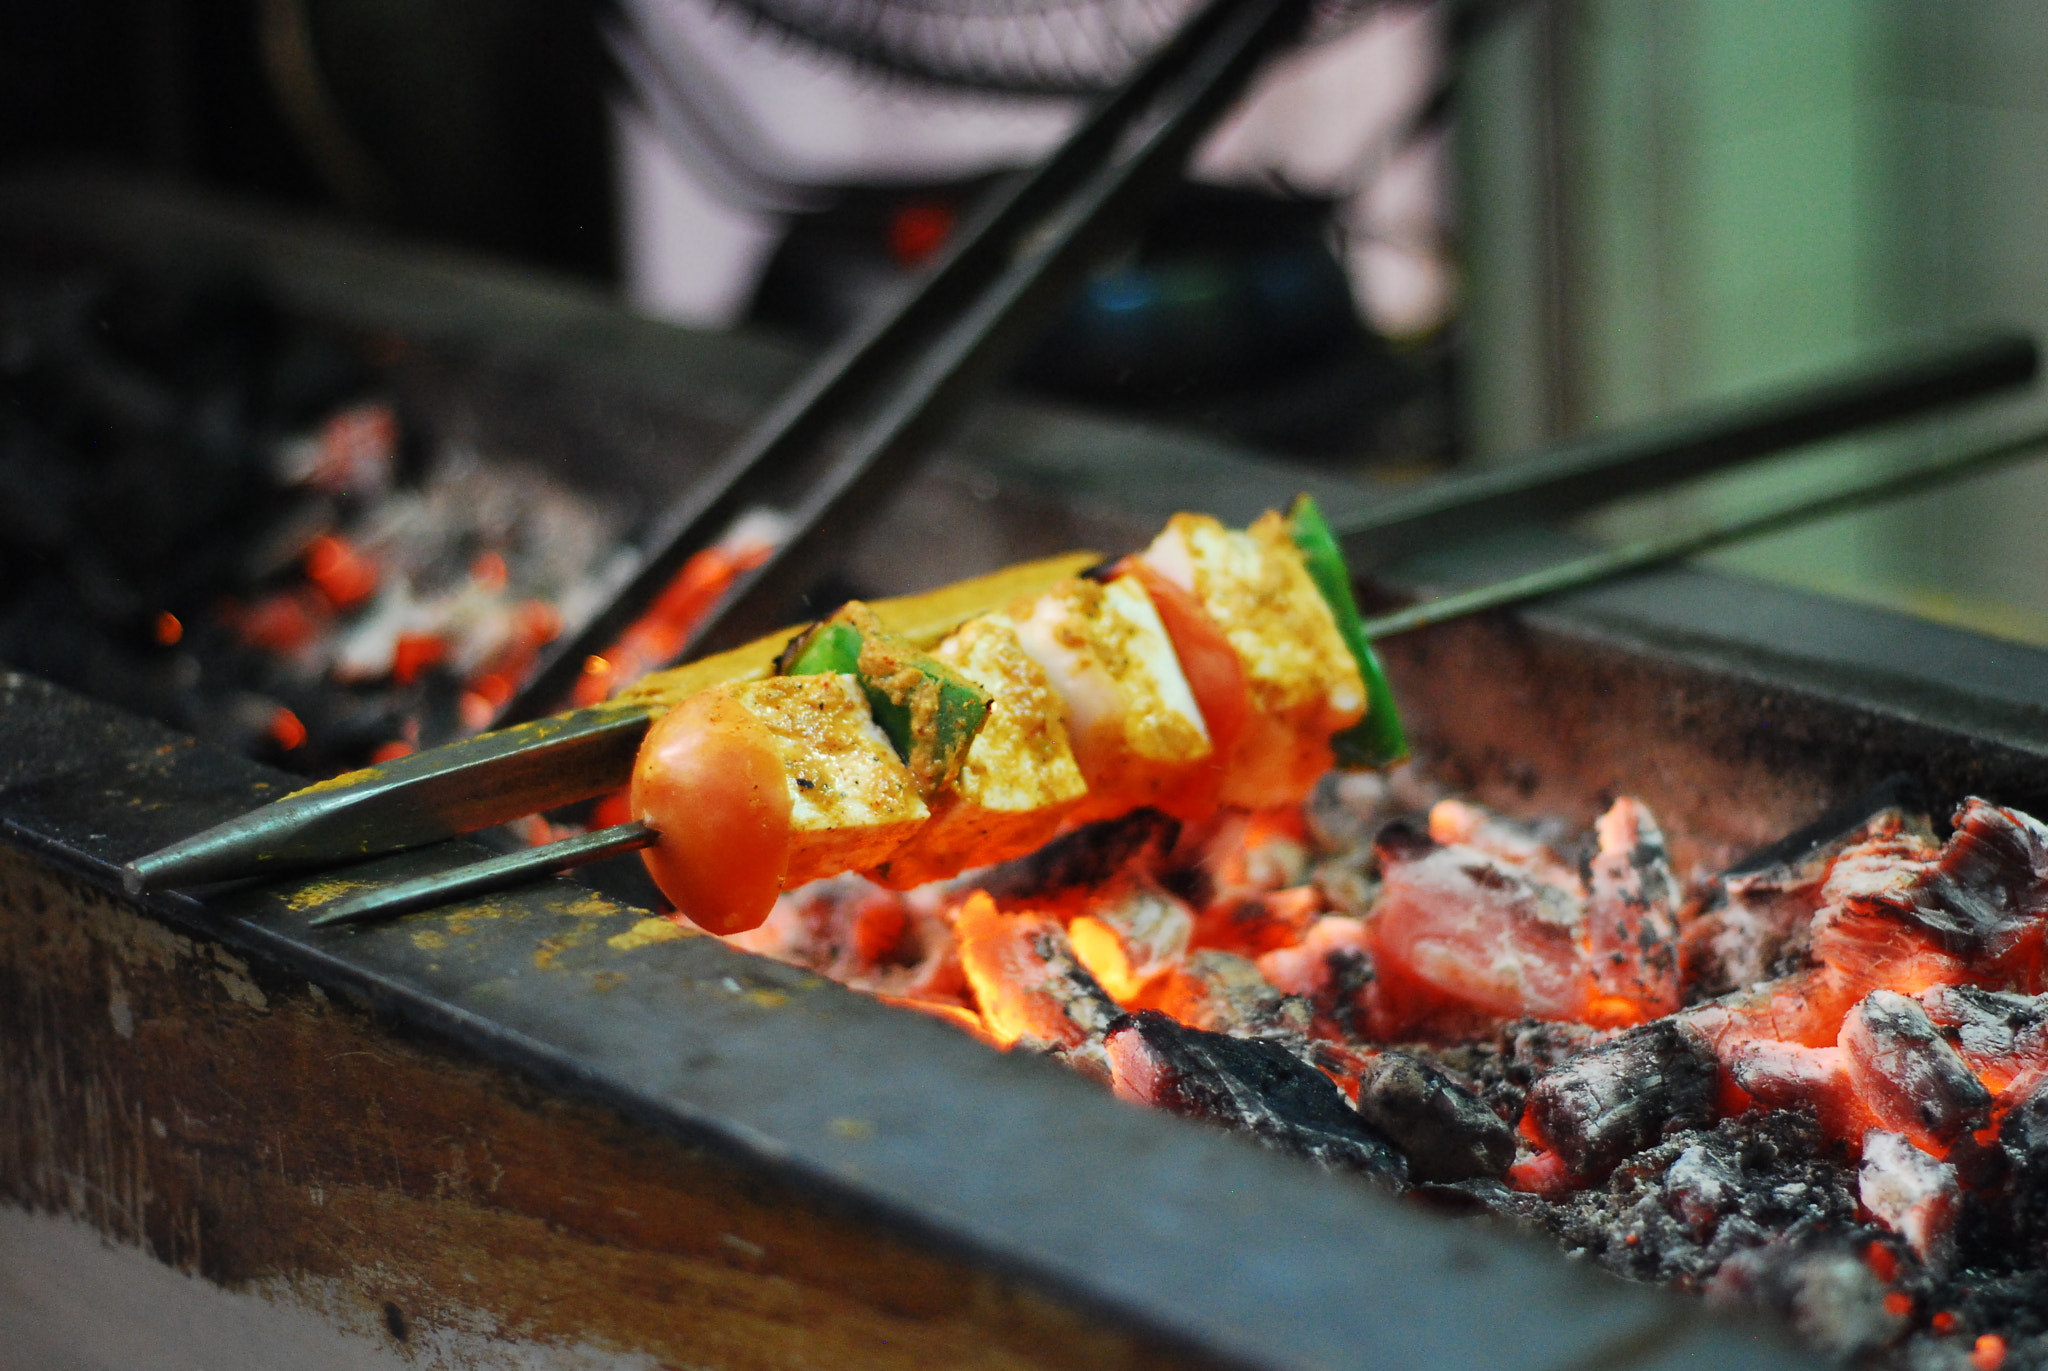 Nikon D80 sample photo. Grilling in india photography